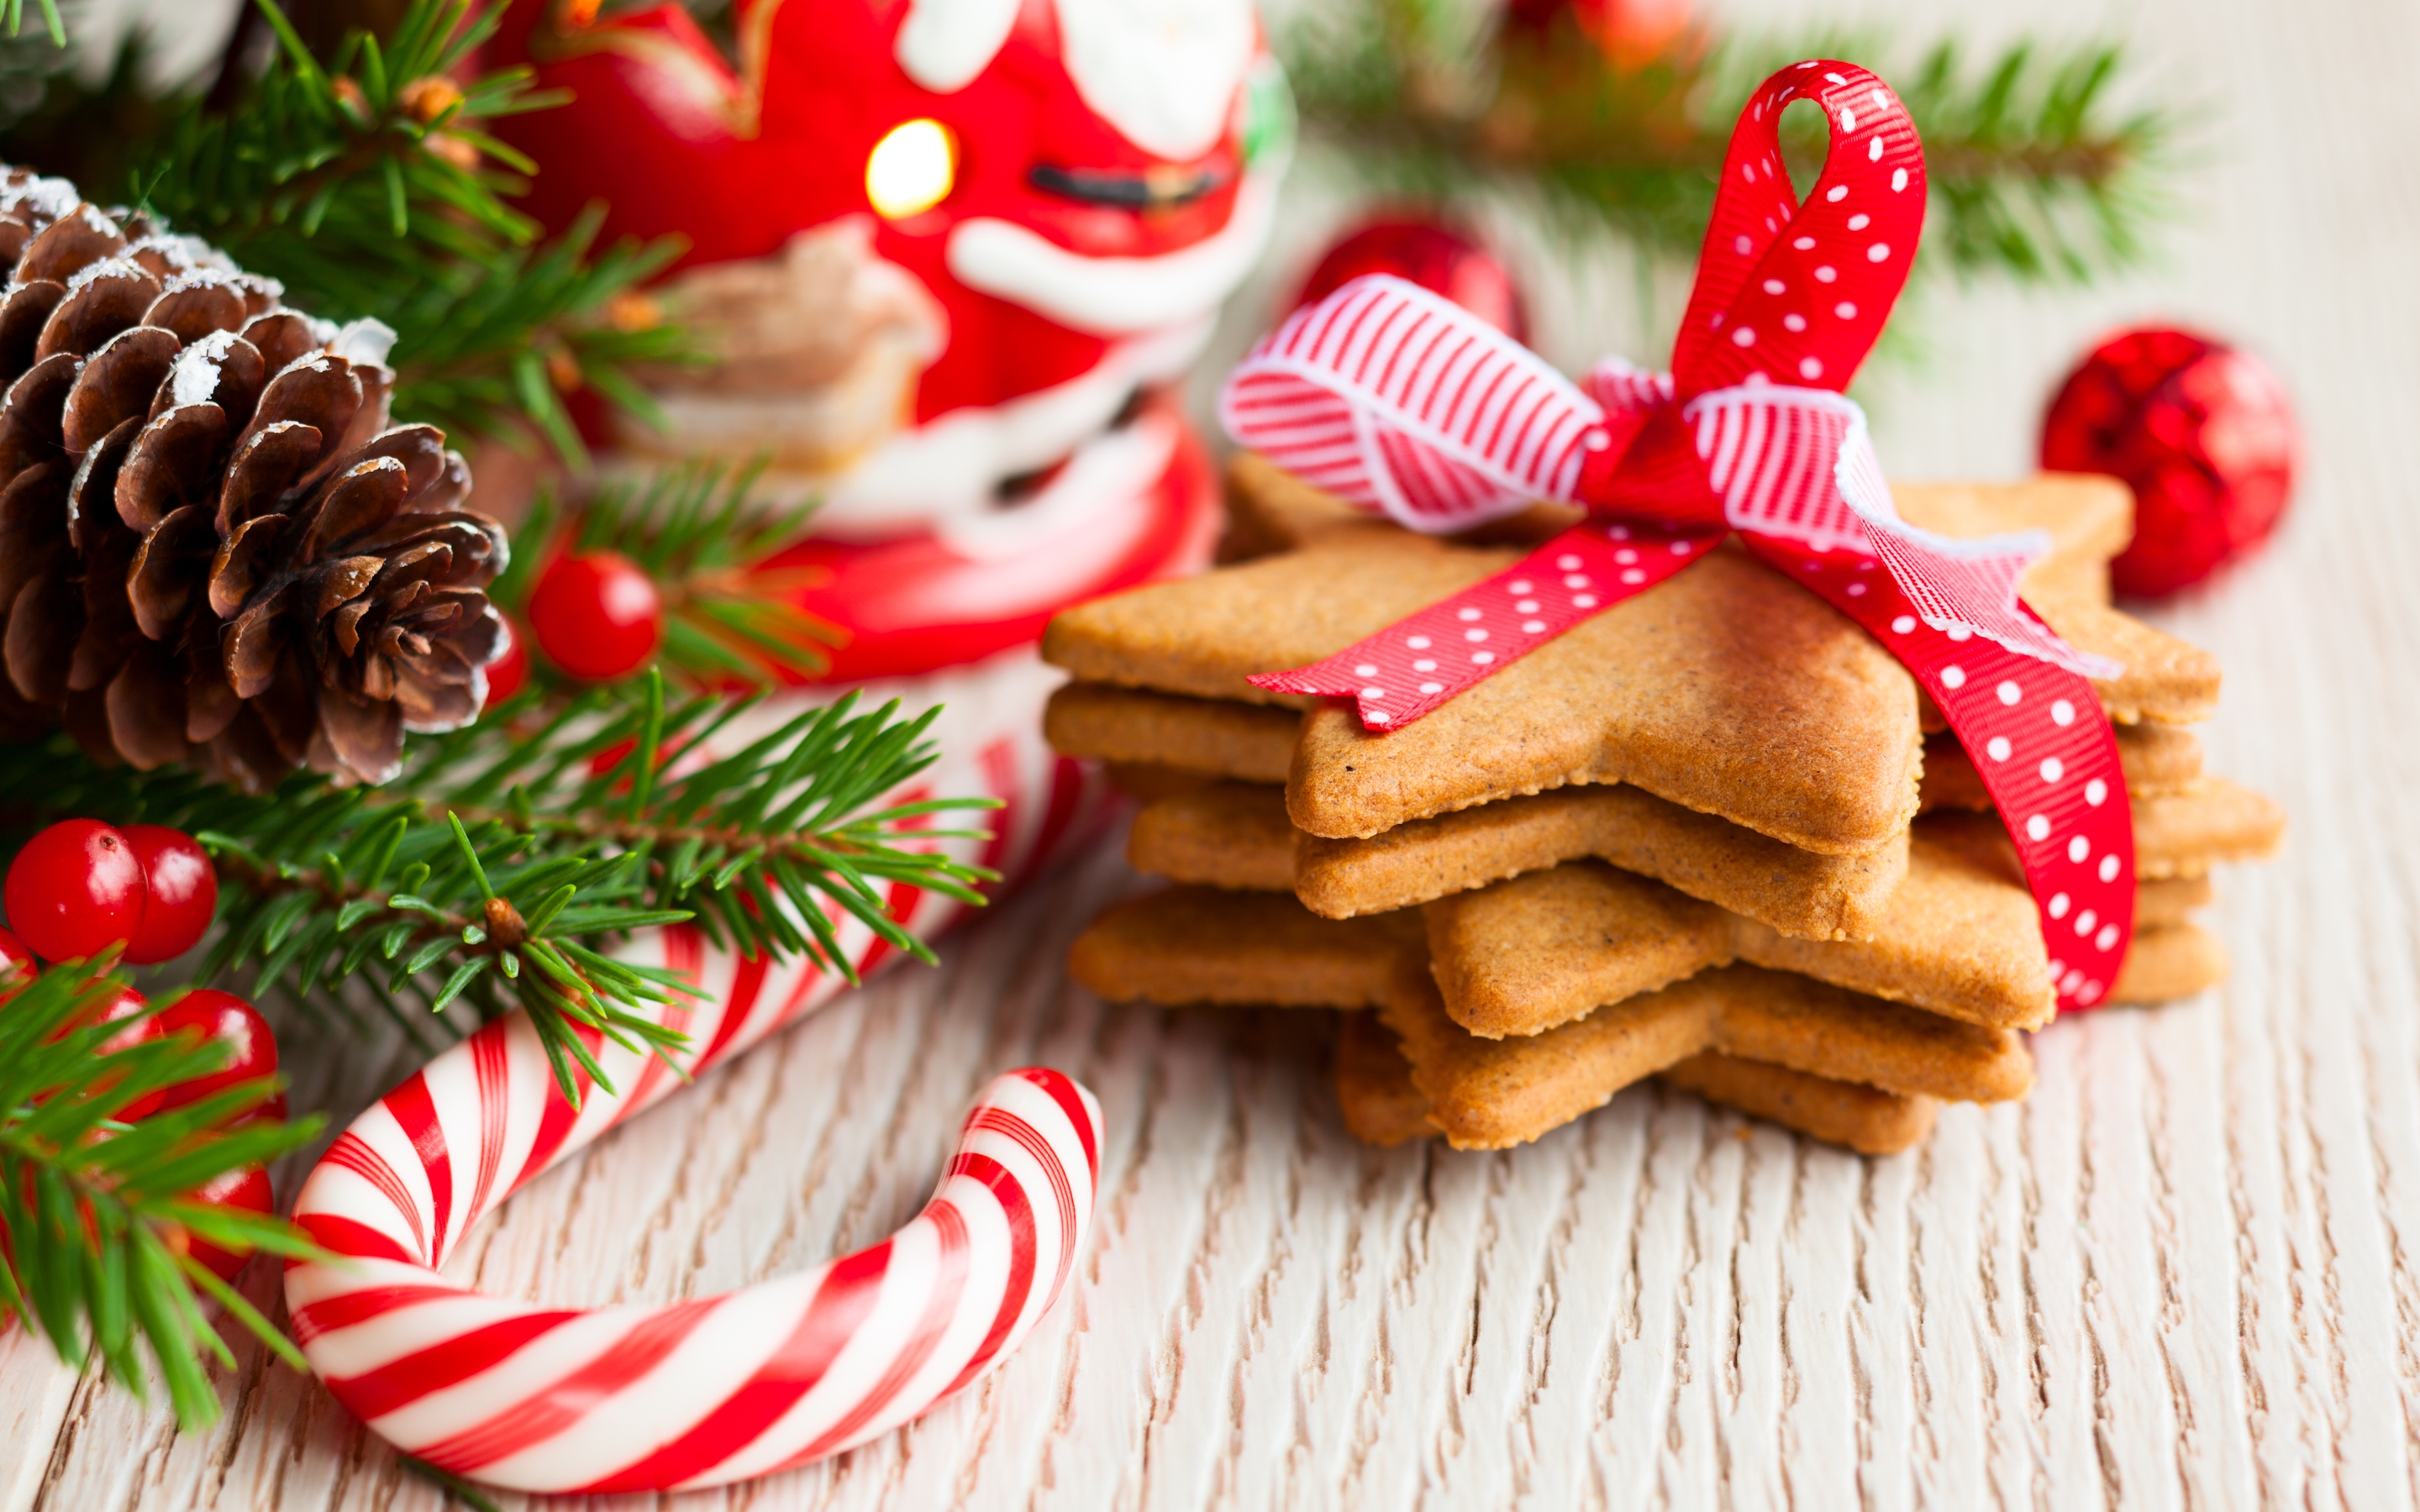 Special Christmas Cookies for 2880 x 1800 Retina Display resolution